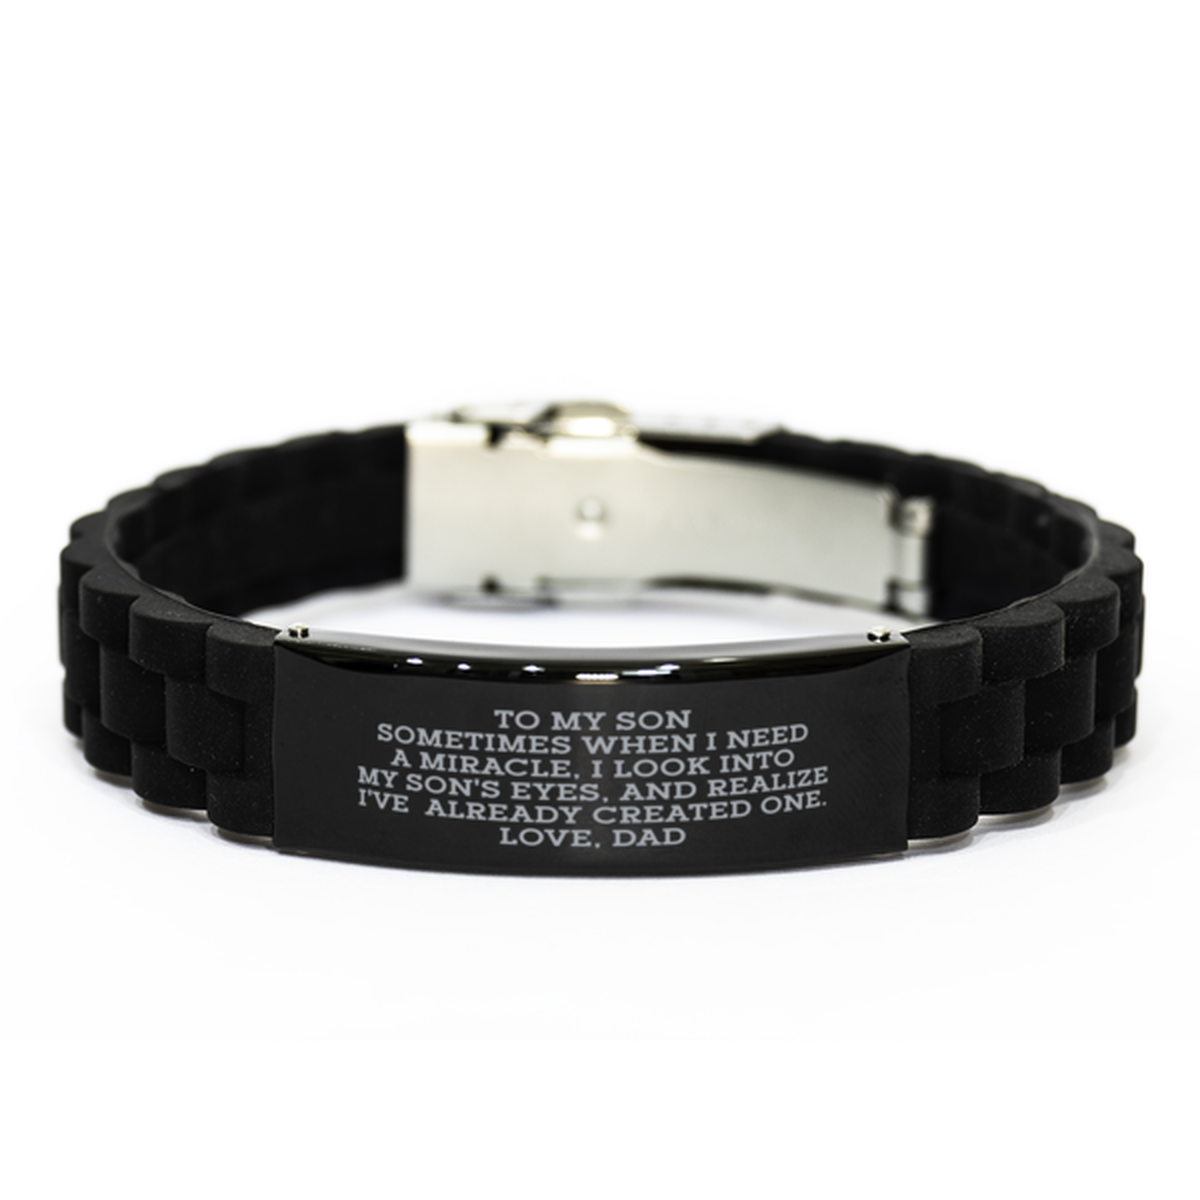 To My Son Black Bracelet, Sometimes When I Need A Miracle, Graduation Day Gifts For Son From Dad, Birthday Gifts For Men